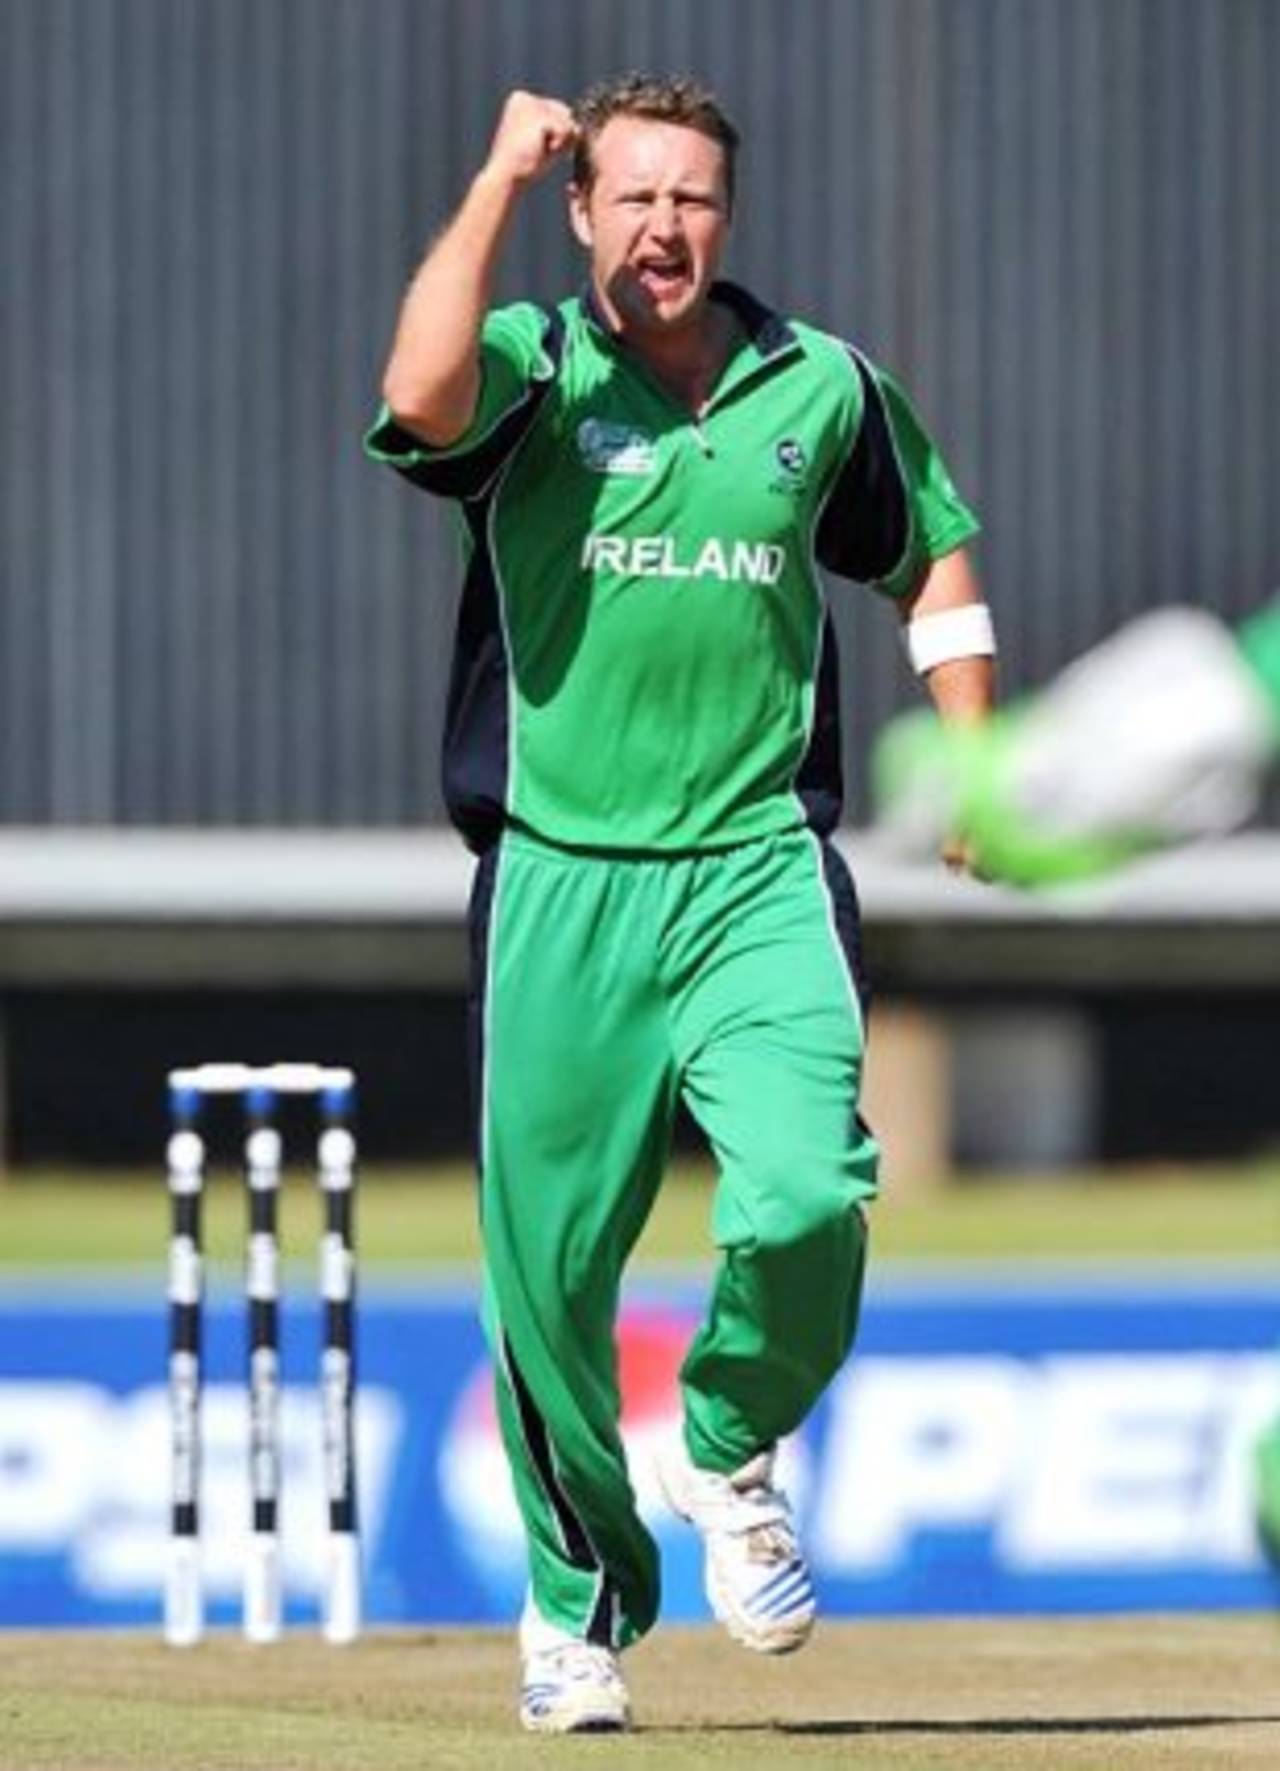 Peter Connell celebrates a wicket, Canada v Ireland, World Cup Qualifier final, Centurion, April 19, 2009